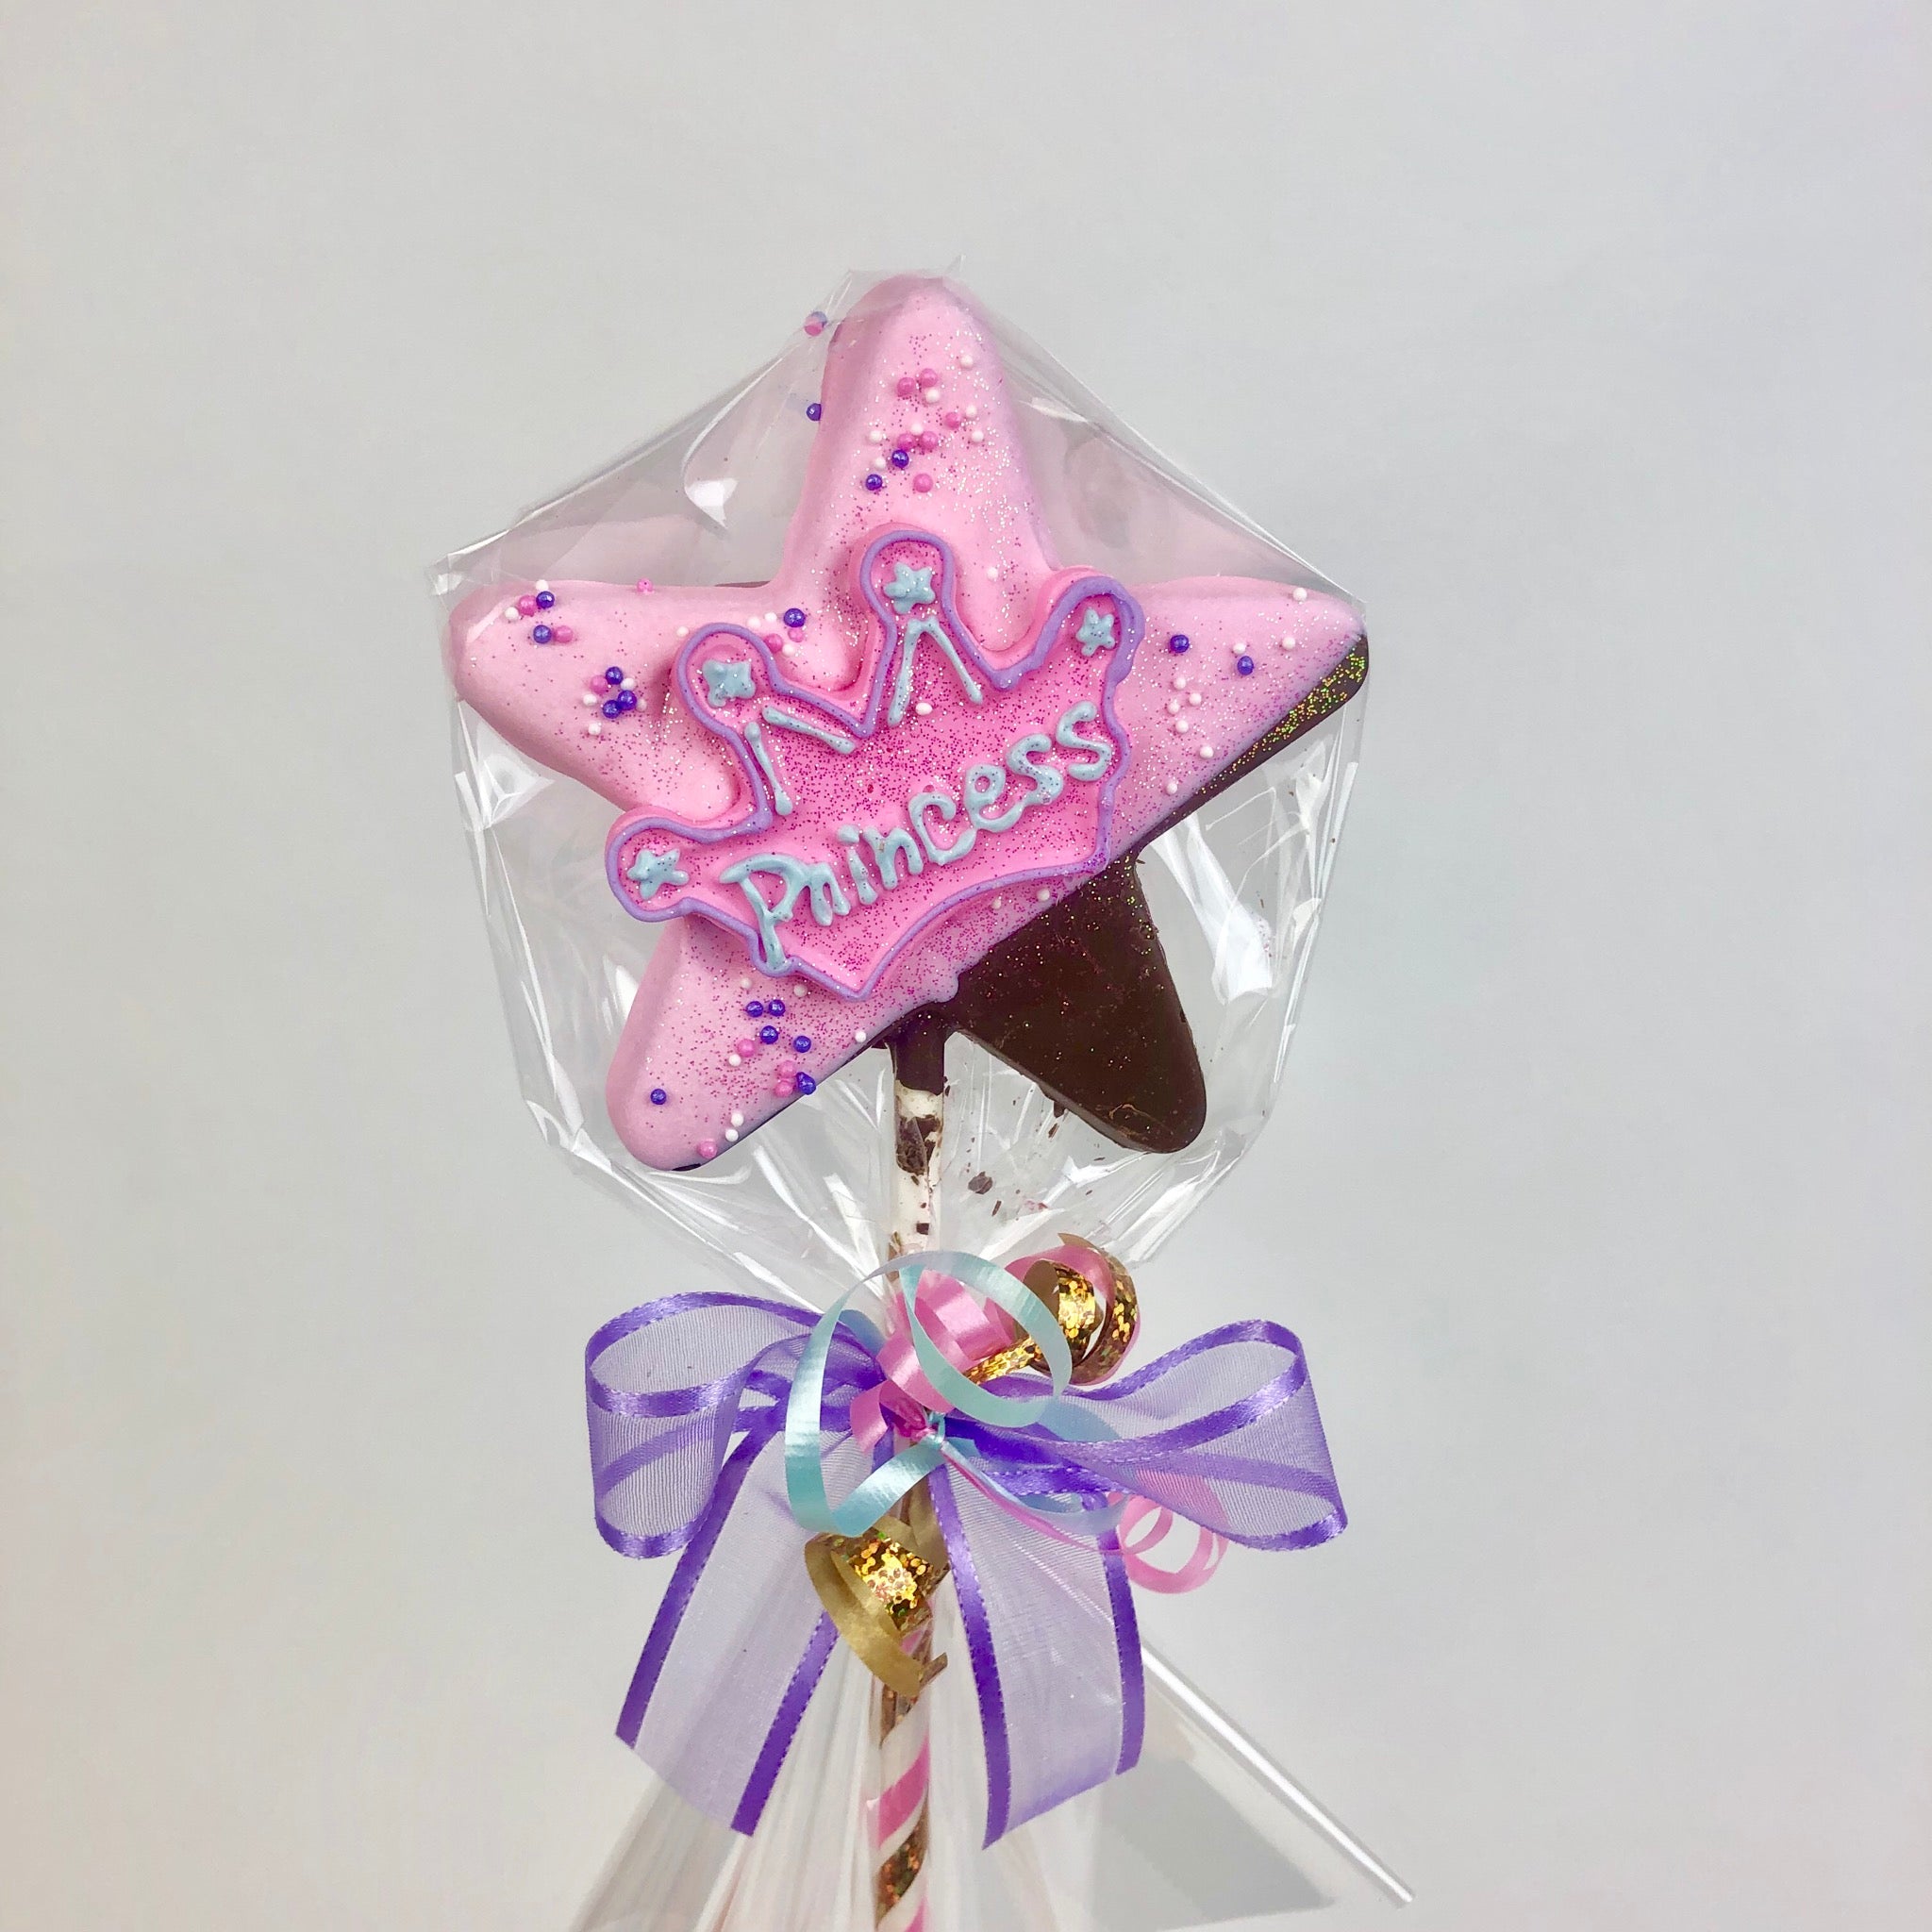 Princess Lolly wrapped in cellophane with a ribbons